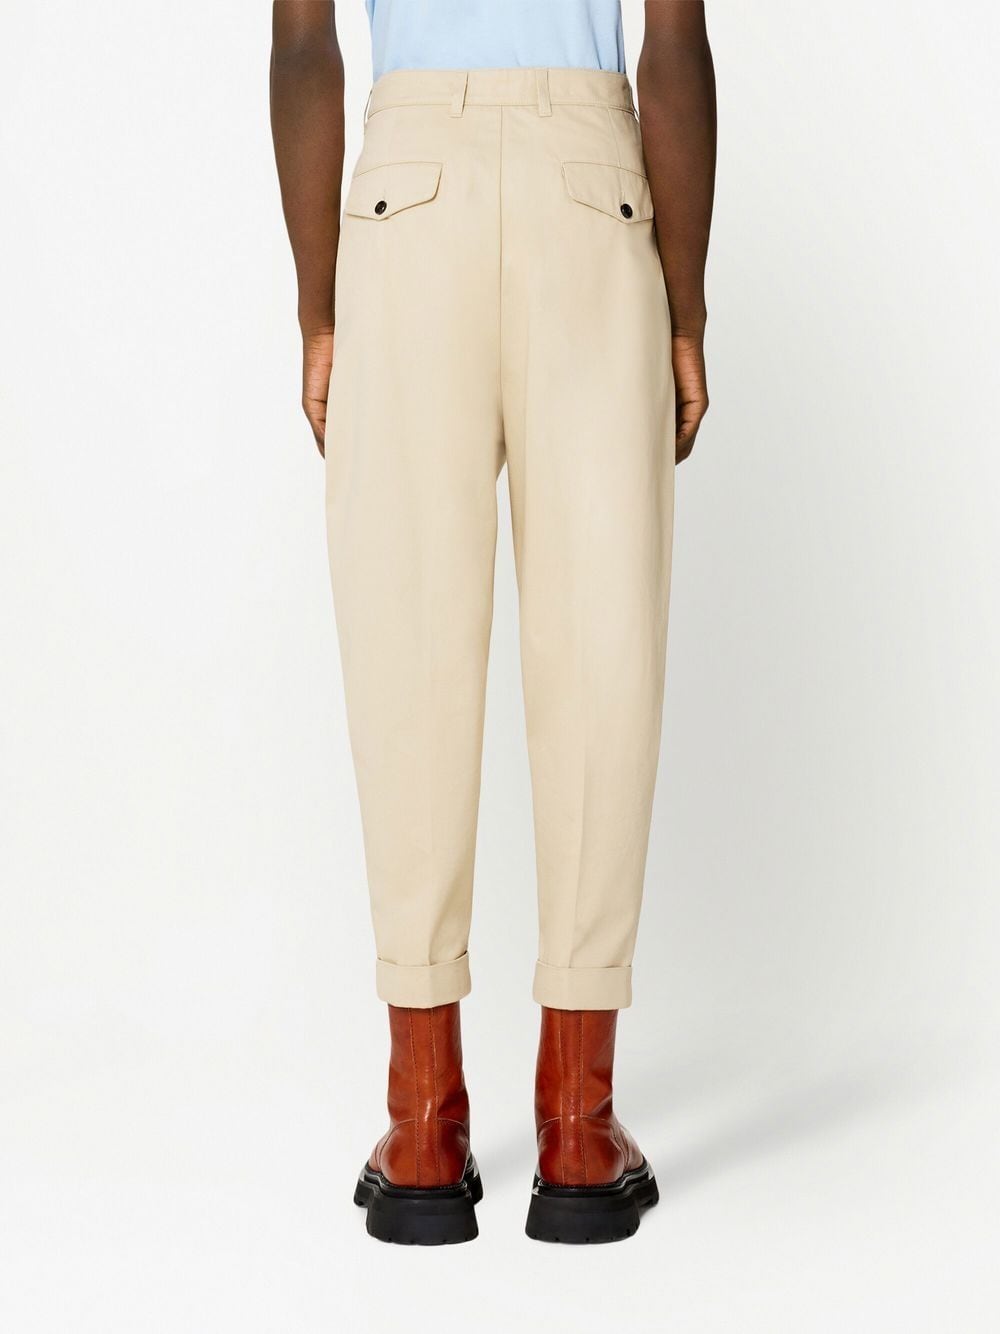 Carrot fit trousers - Beige